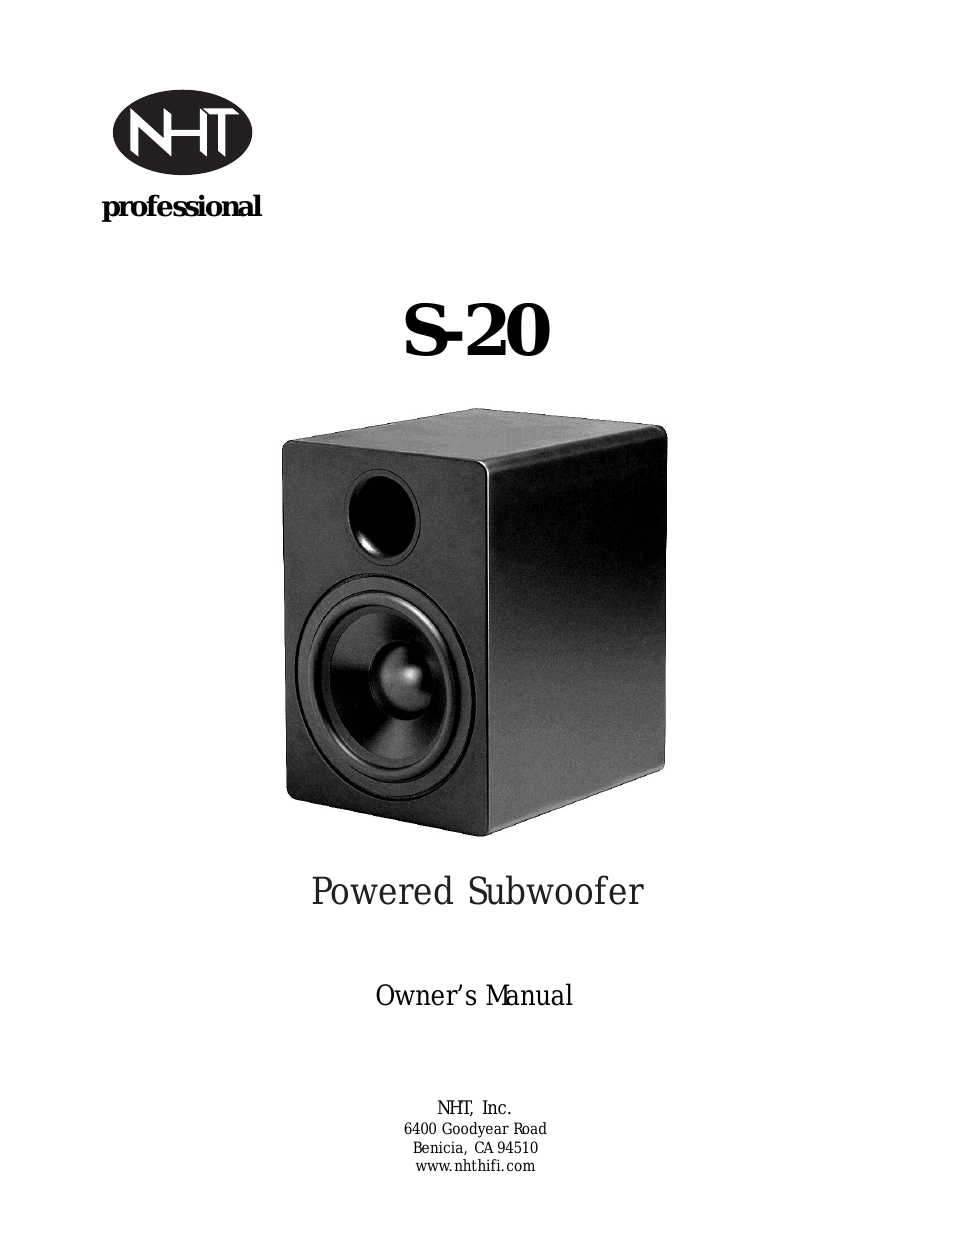 Powered Subwoofer S-20